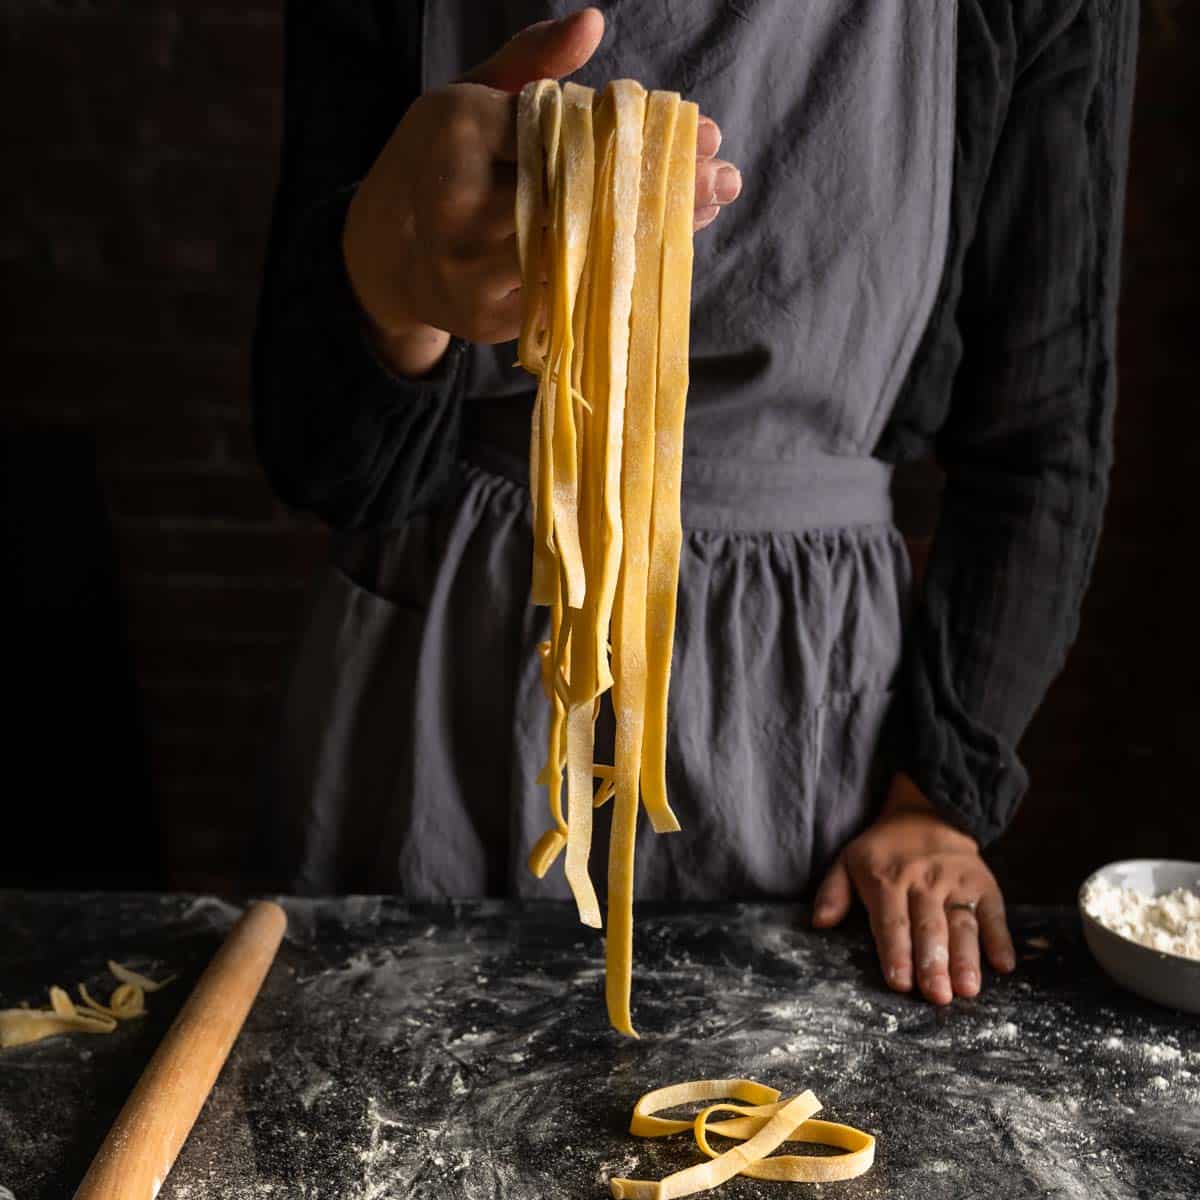 A woman holding up a handful of fresh fettuccine pasta